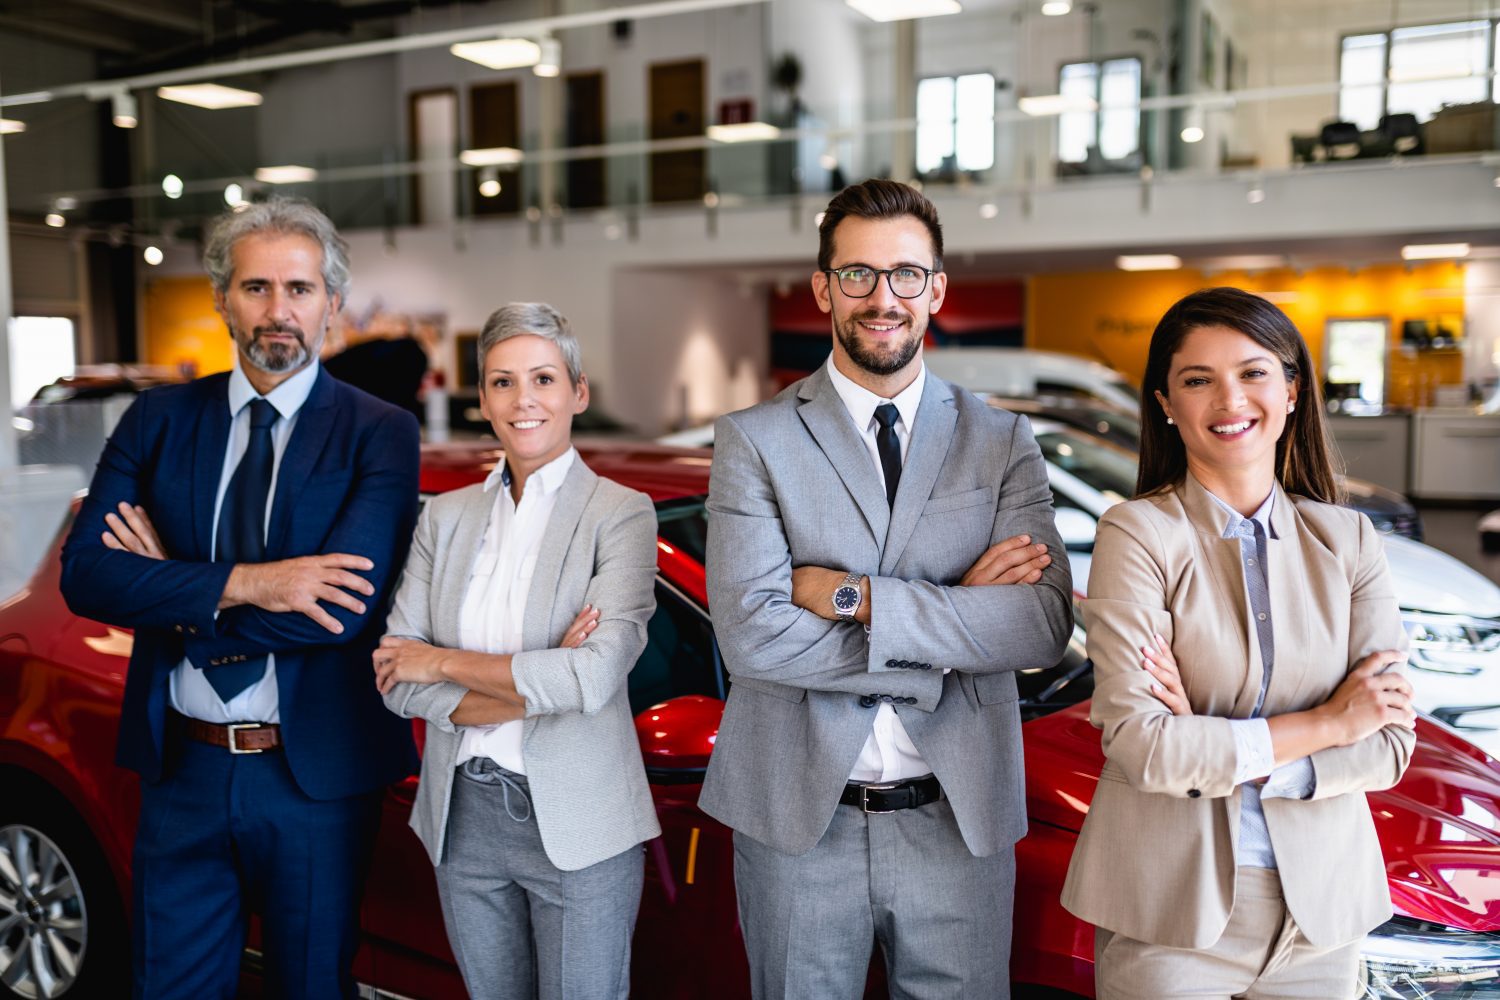 With a suite of data presentation tools, the Digital Leaderboard deepens the connection and trust across all levels of the dealership.